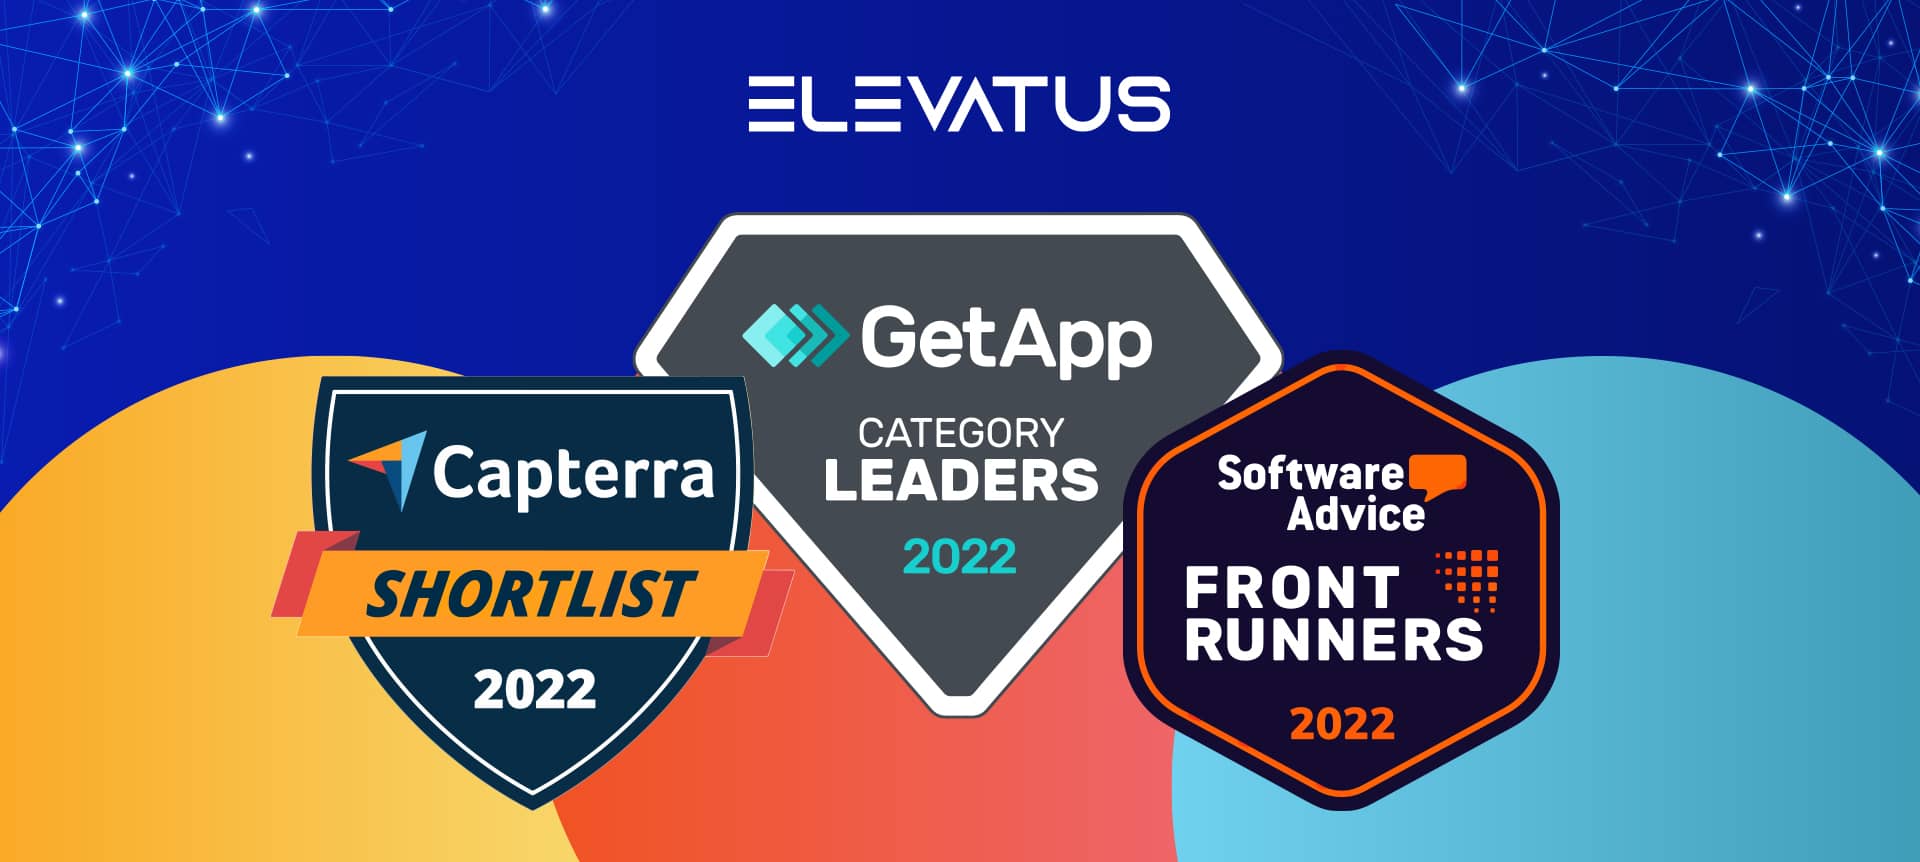 Elevatus Listed as “Top-Rated Recruiting Software in 2022” by Capterra, Software Advice, and GetApp!